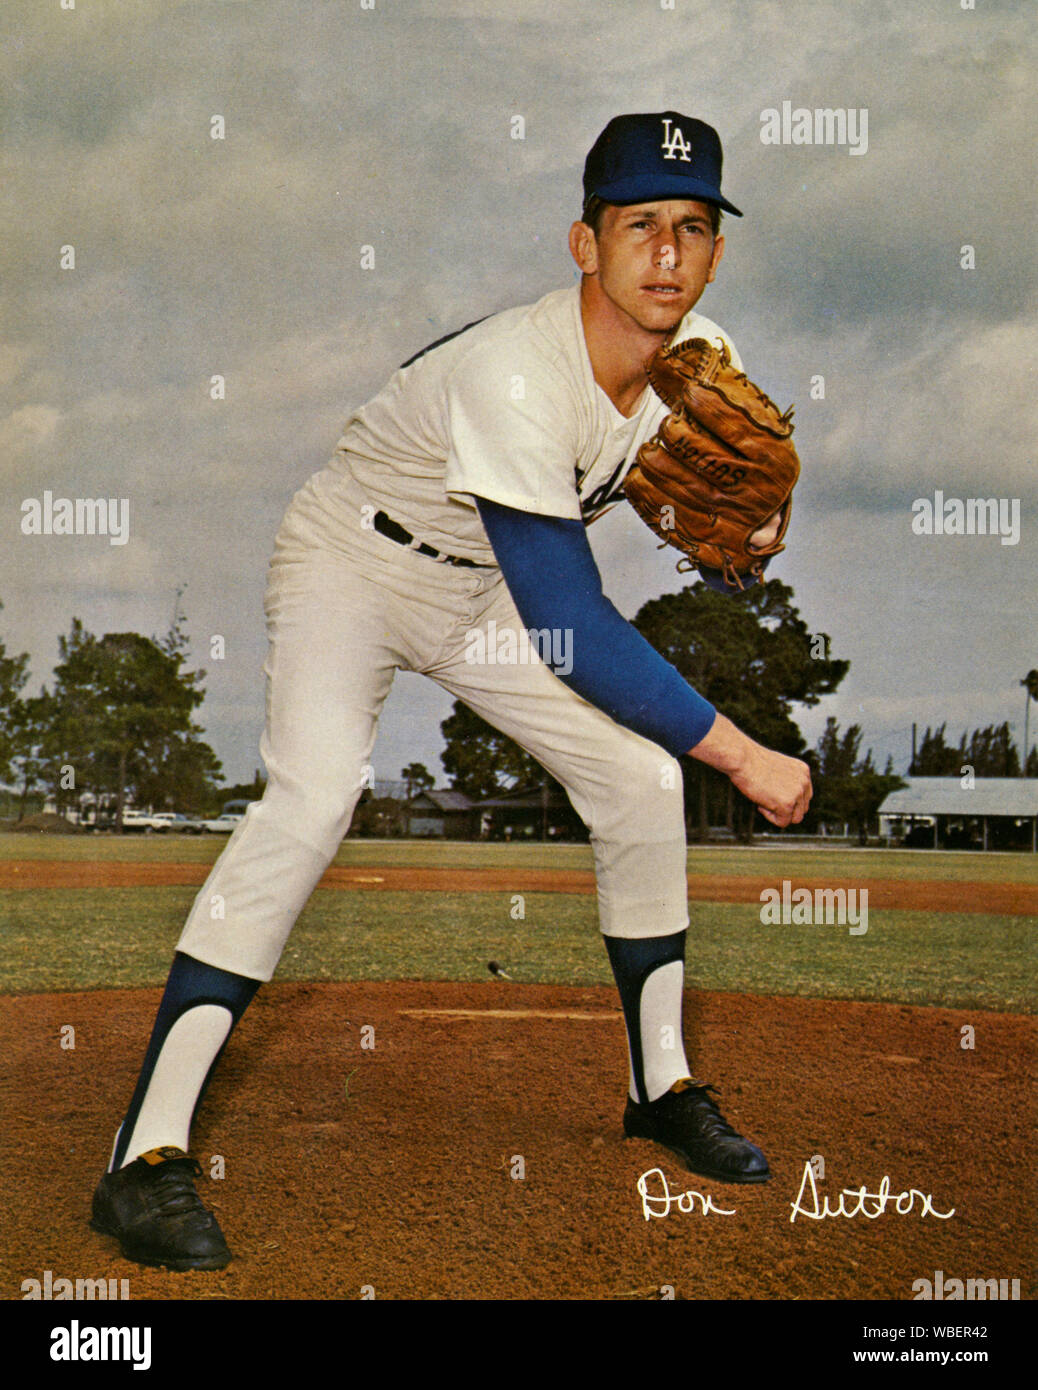 Don Sutton, the star pitcher for the Los Angeles Dodgers throughout the 1970s poses for a souvenir photo on the field of the dodgers spring training facility then in Vero Beach, FL Stock Photo